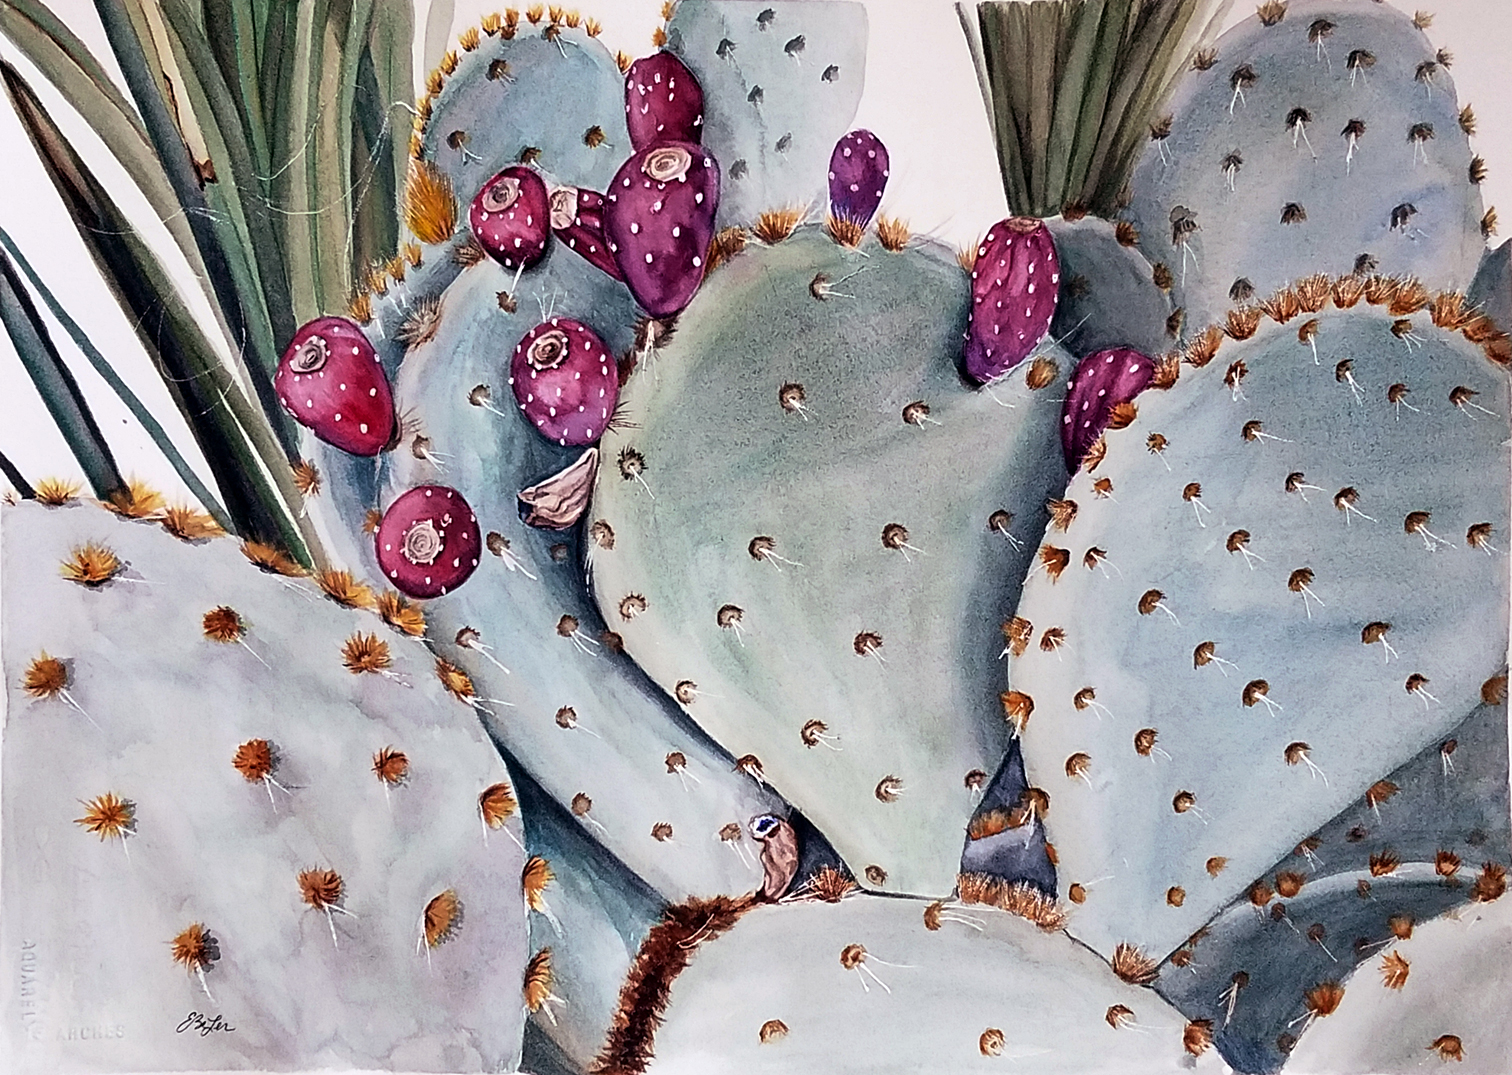 "Cactus Fruit" is a watercolor of a prickly pear cactus with red fruit by artist Esther BeLer Wodrich